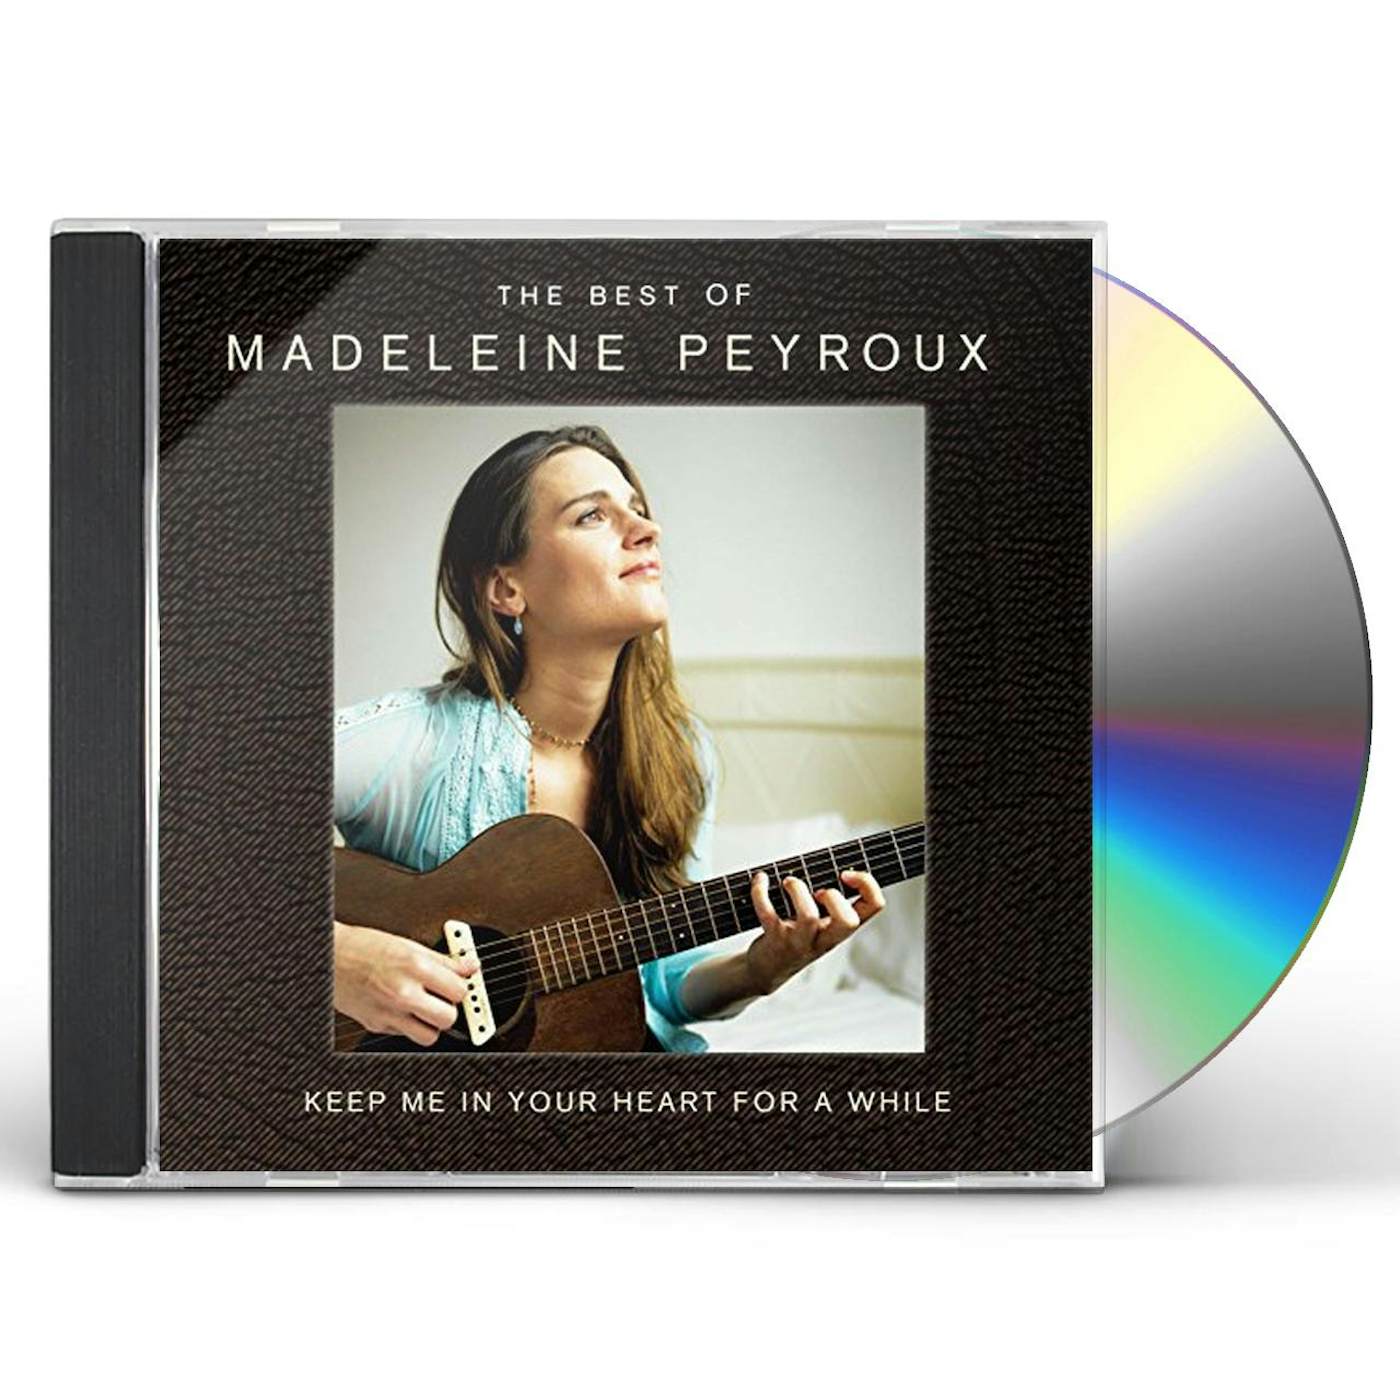 Madeleine Peyroux KEEP ME IN YOUR HEART FOR A WHILE CD